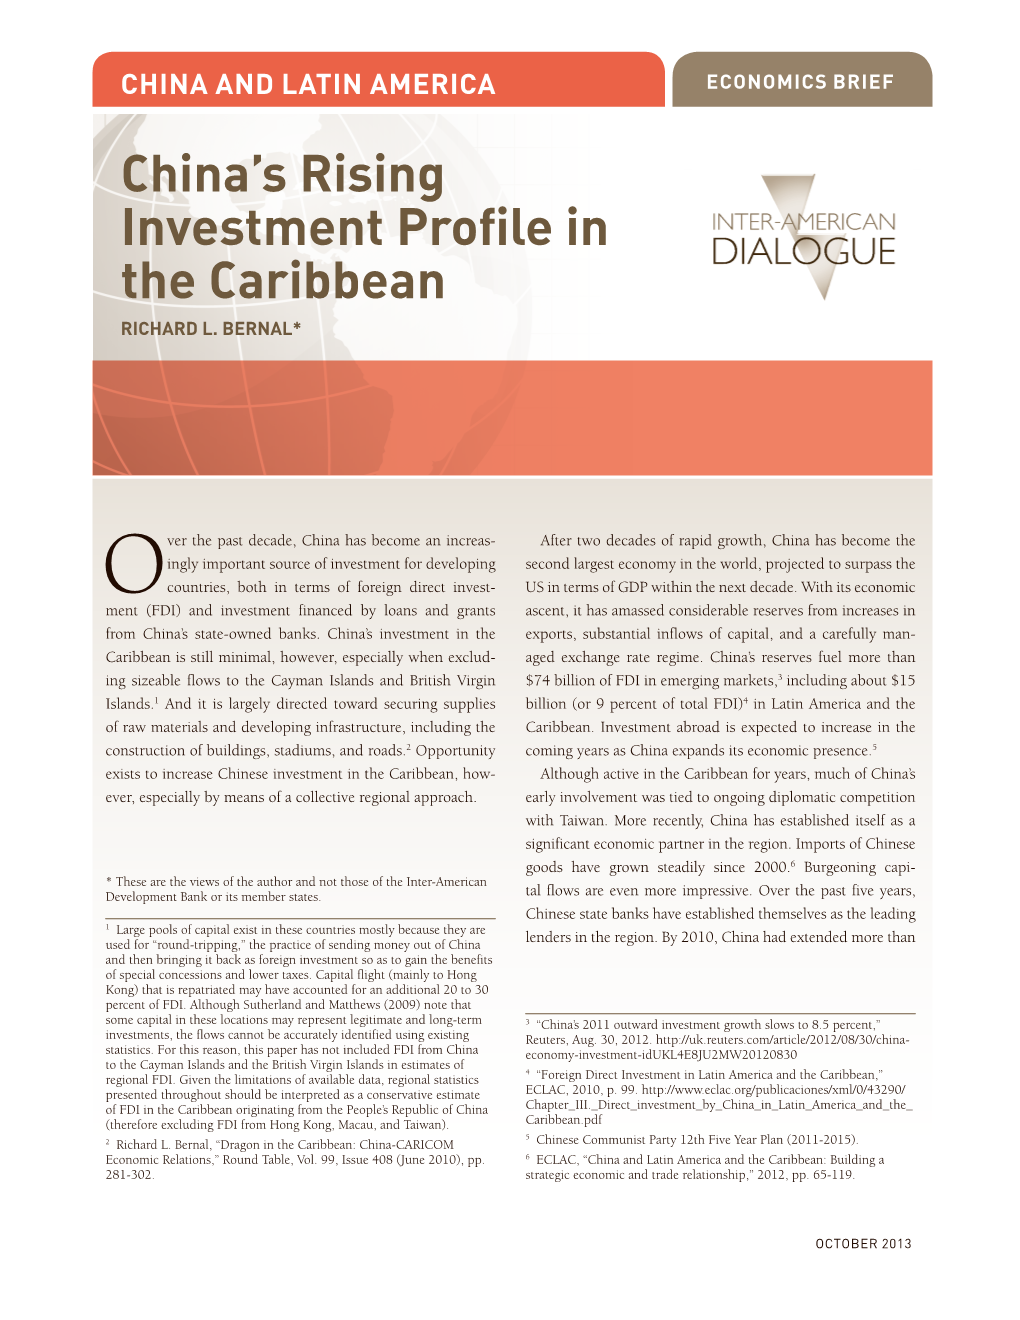 China's Rising Investment Profile in the Caribbean